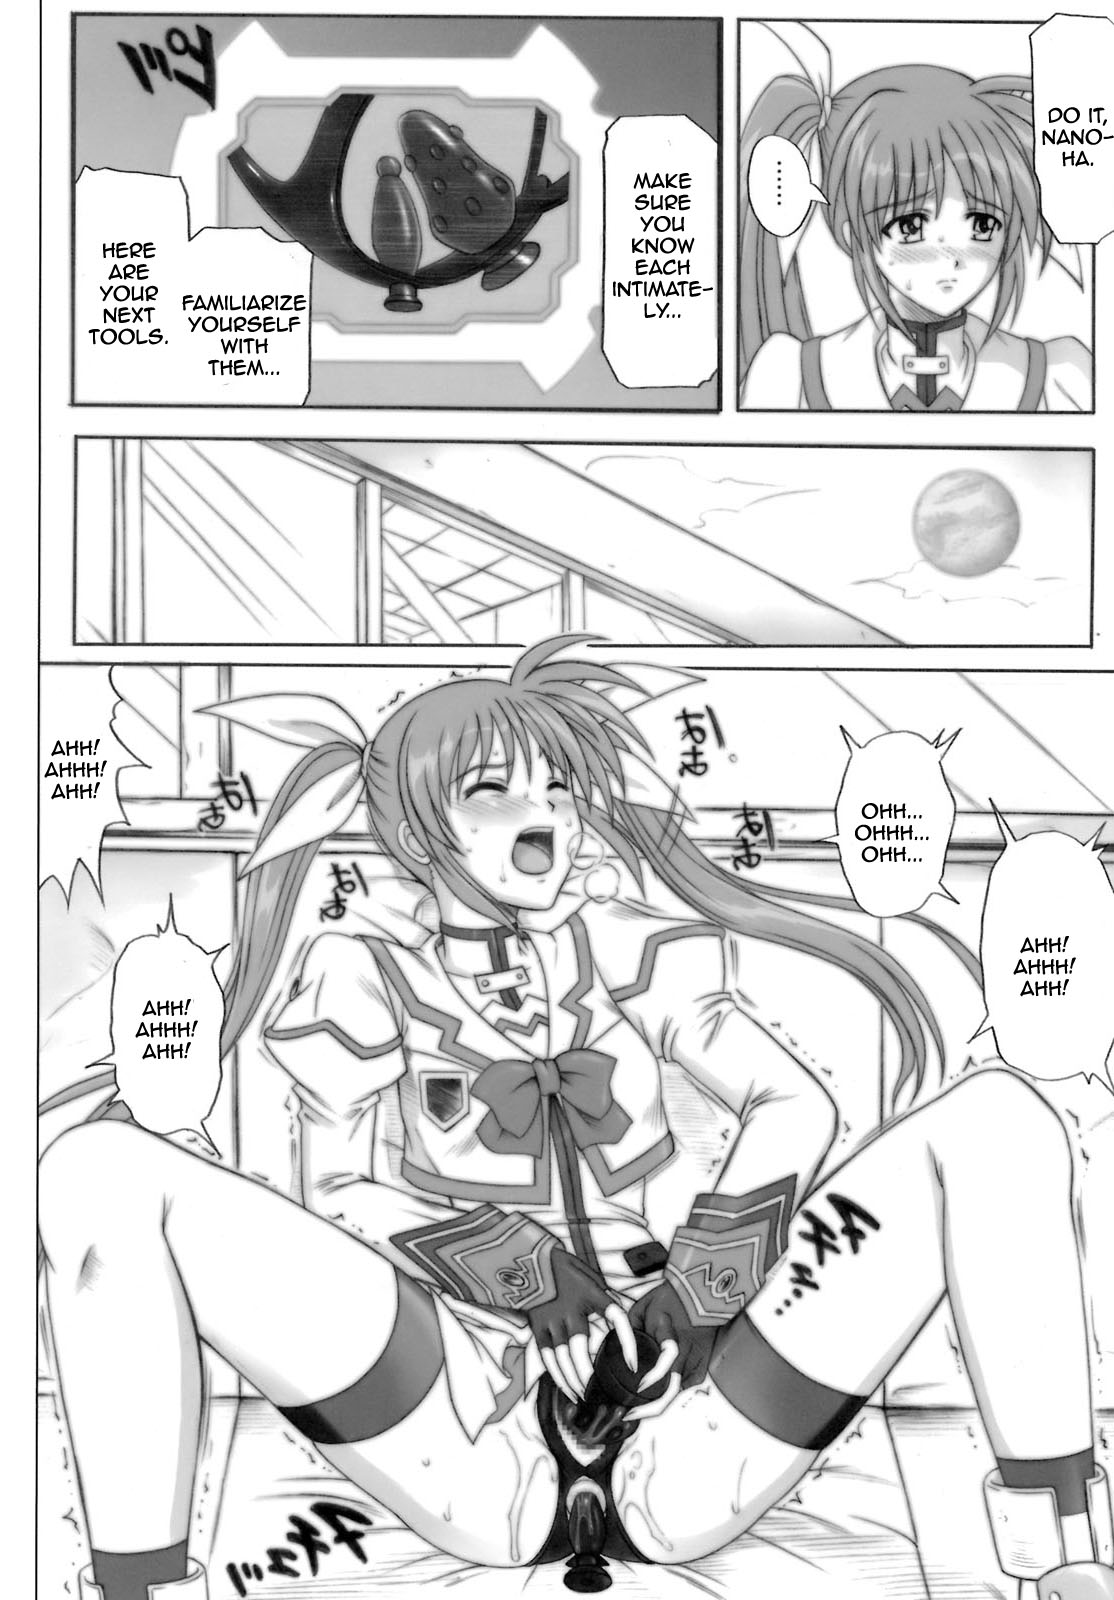 840 Color Classic Situation Note Extention (Mahou Shoujo Lyrical Nanoha) [English] [Rewrite] page 8 full